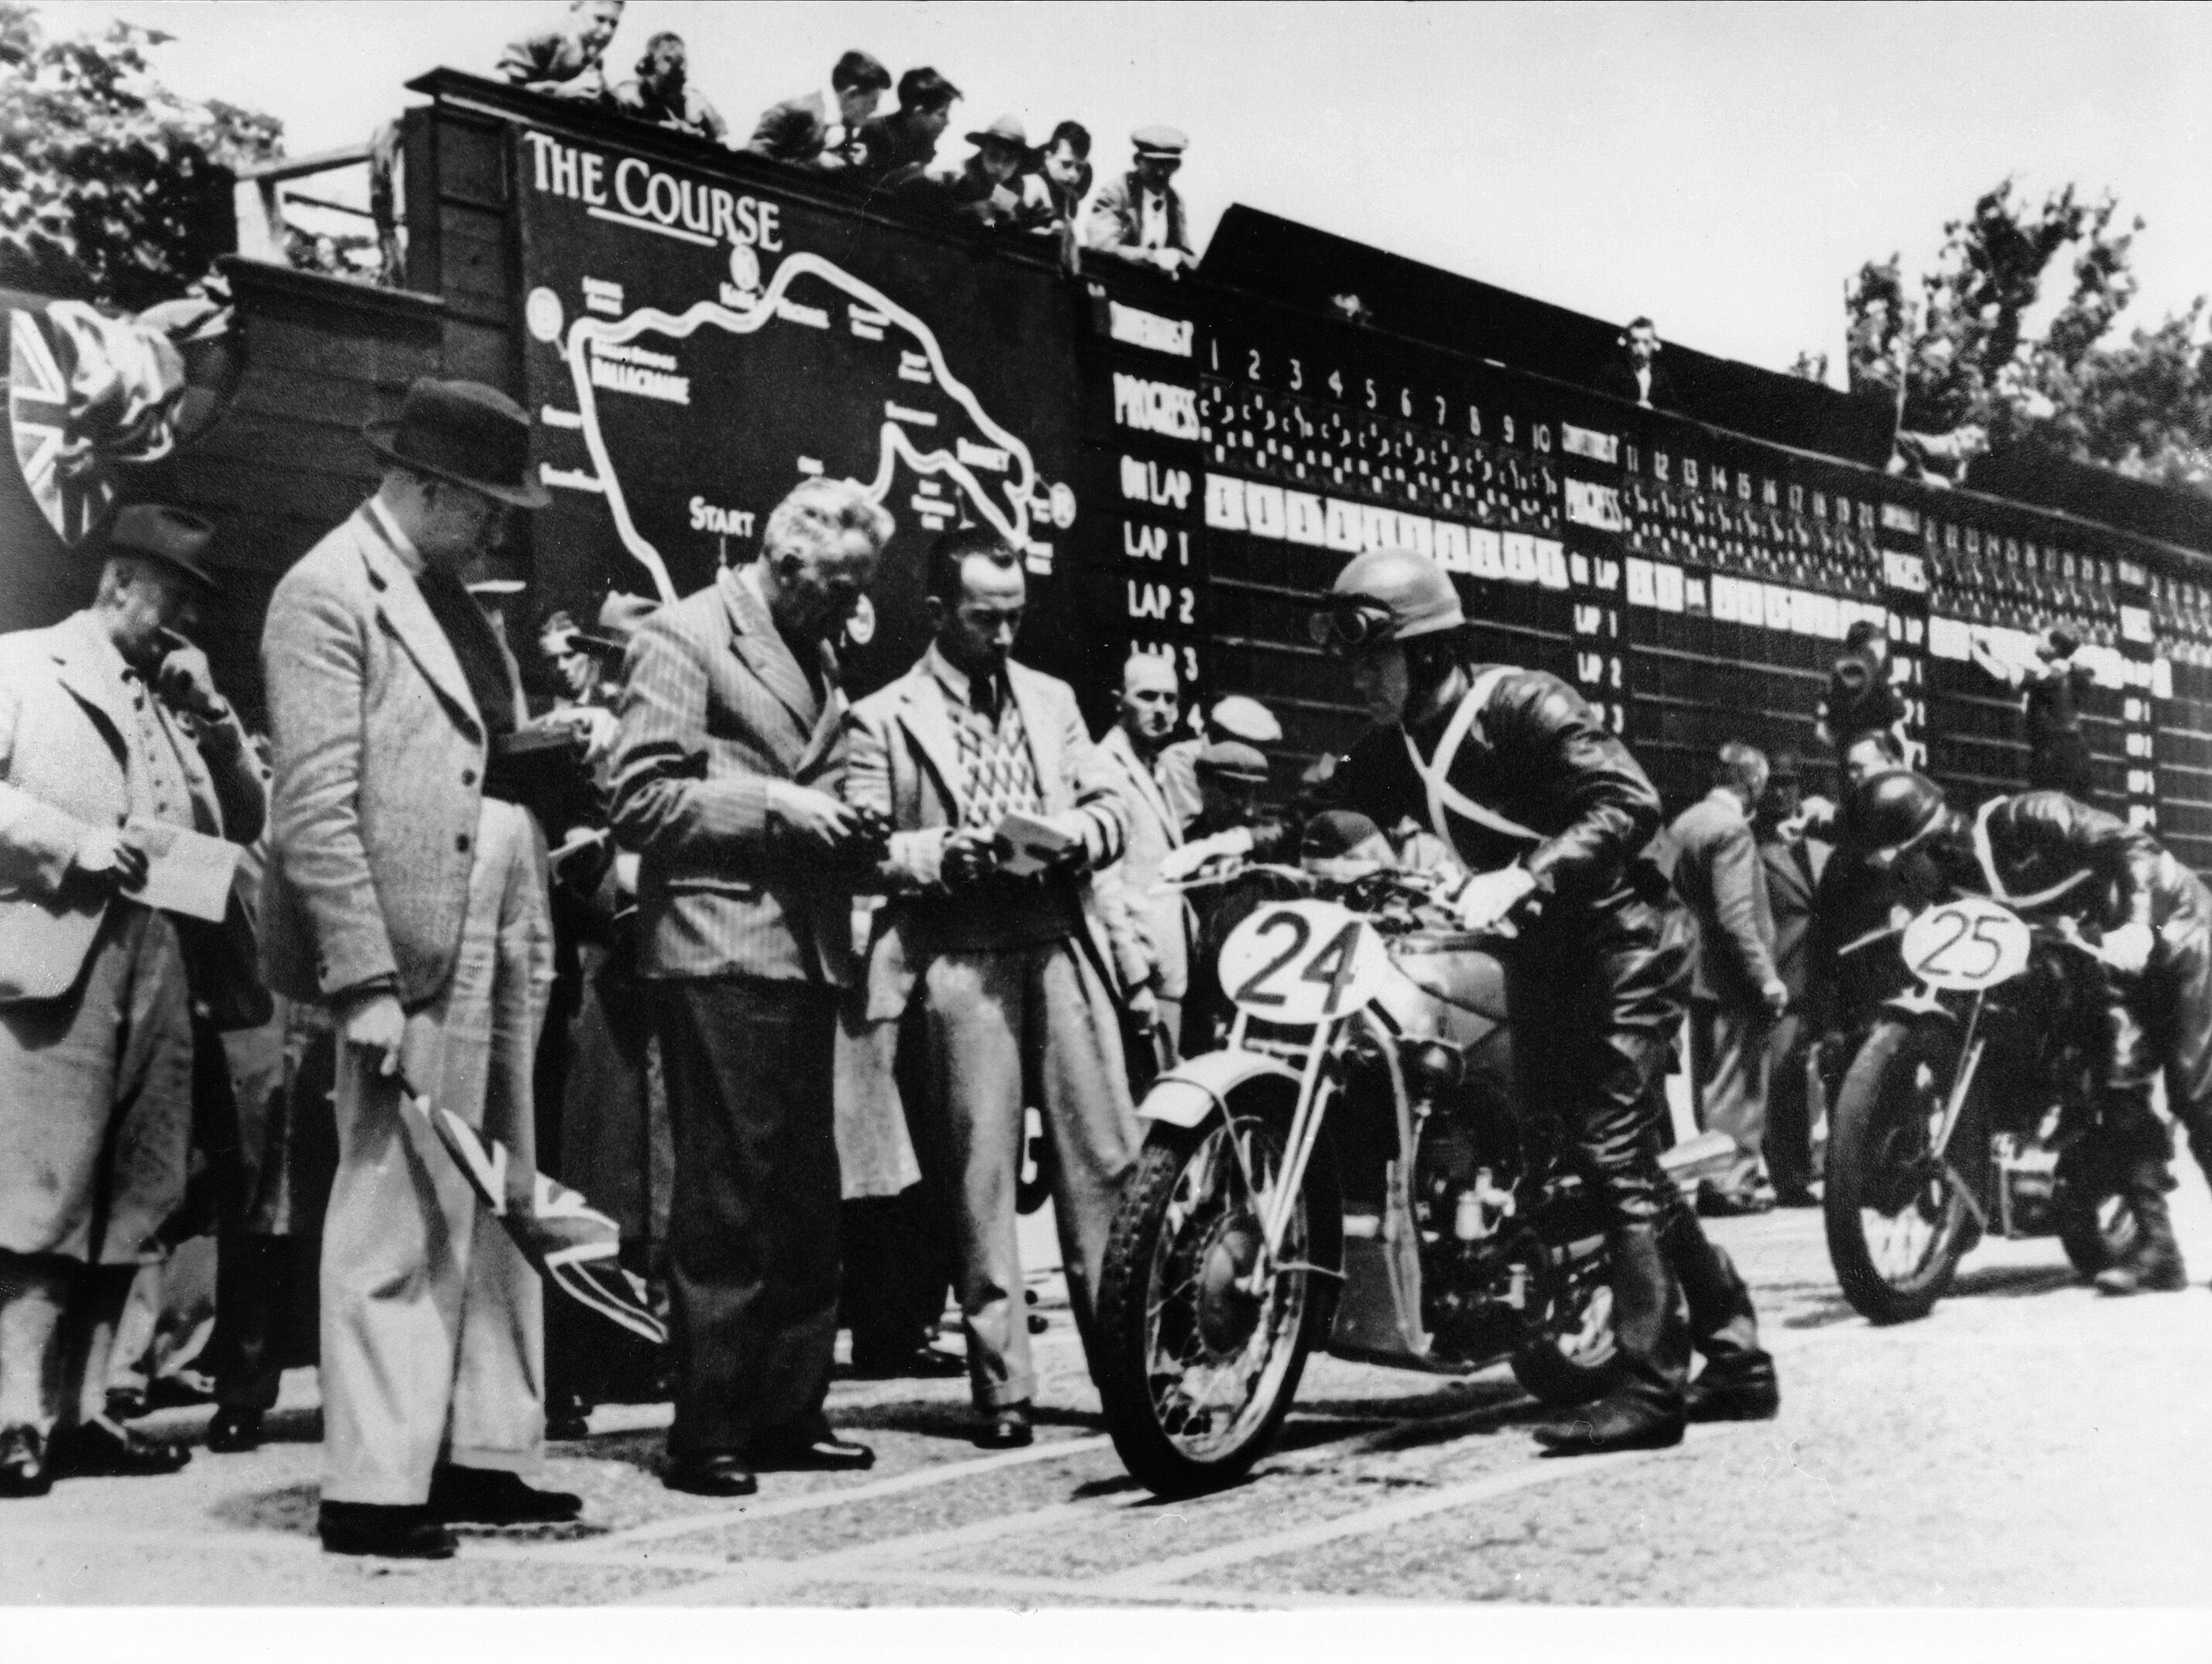 Starting the race of his life: In June 1938 DKW works rider Ewald Kluge (No. 24) became the first German to win the 250 cc class in the Isle of Man TT, the world's toughest motorcycle road race